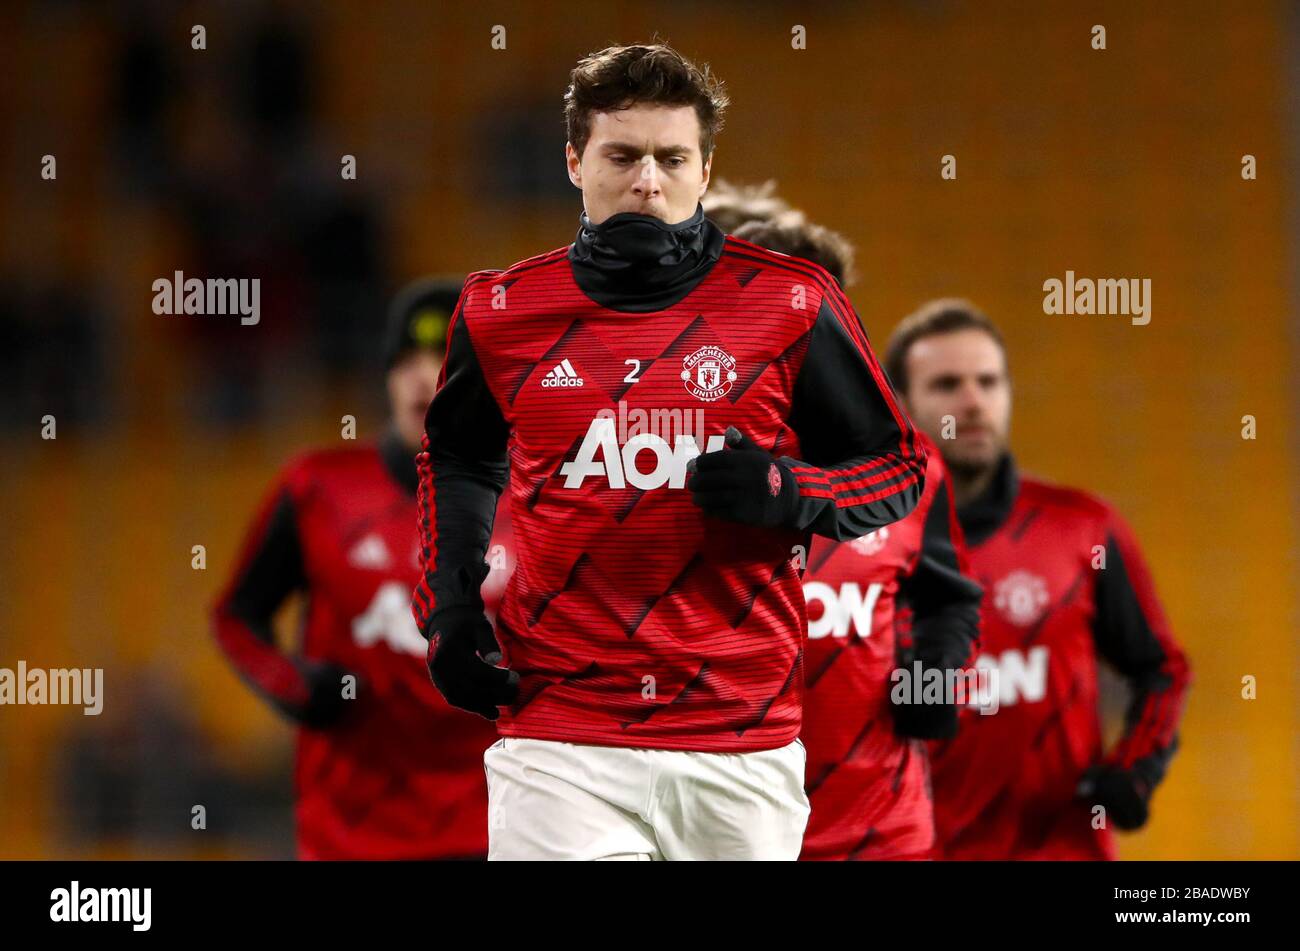 Manchester United's Victor Lindelof warms up ahead of the match Stock Photo